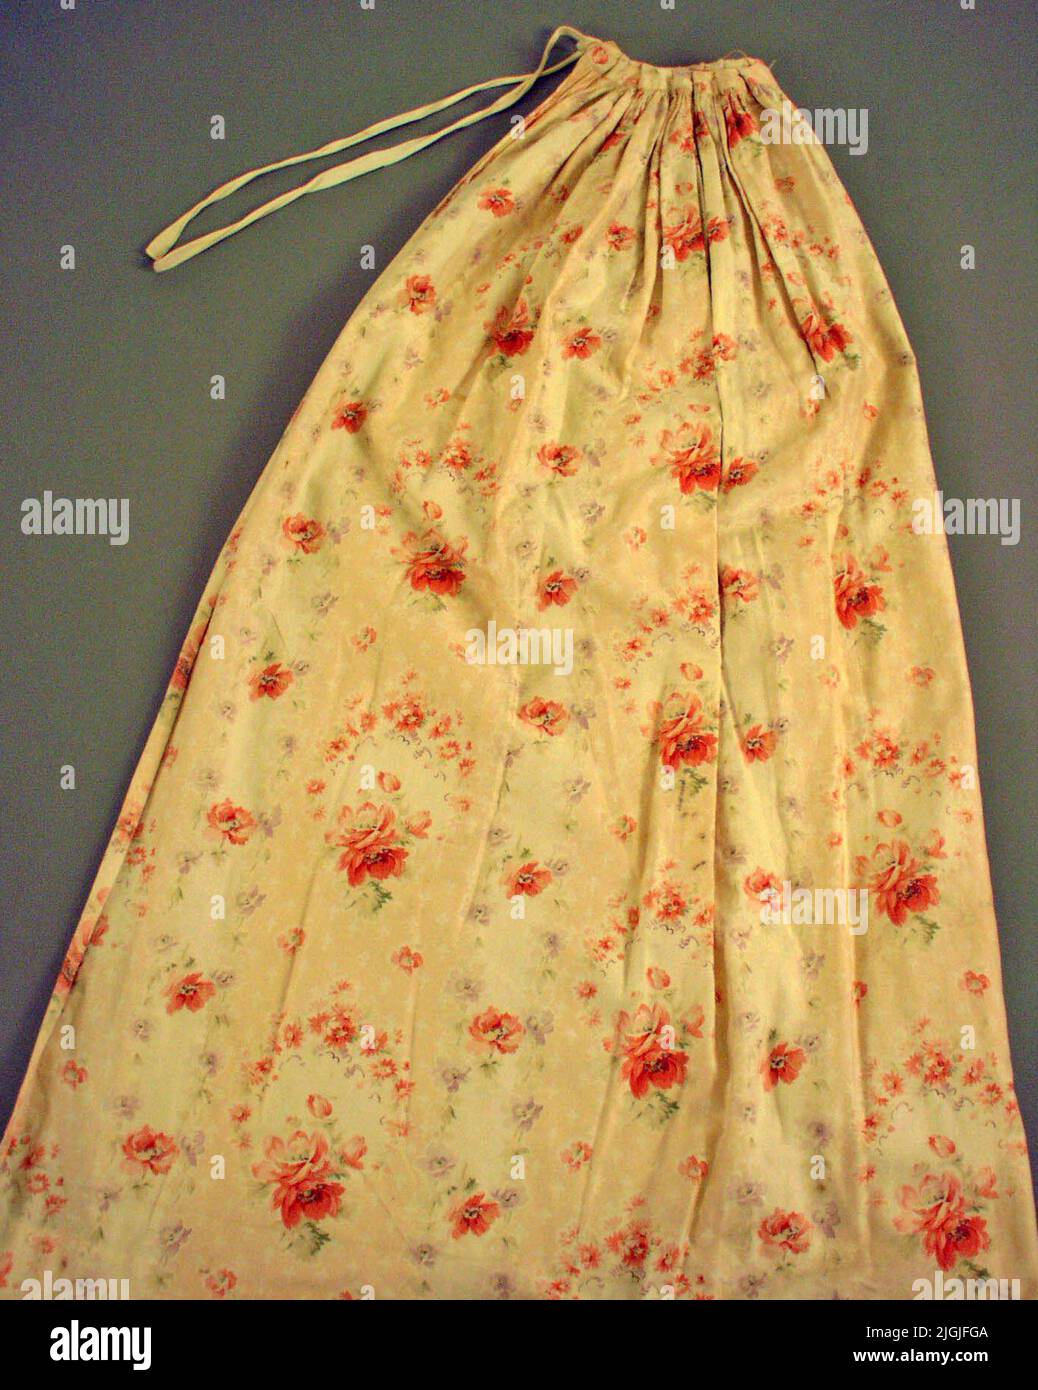 Förkläde Apron of cut -flowered cotton satin. Tightly wrinkled and later inmate with 6 folds on both sides. Partly hand and partly machine-sewn. The hem has previously been narrower. The apron consists of 2 rods. The tie bands are white four -shaft cotton straps. Stock Photo